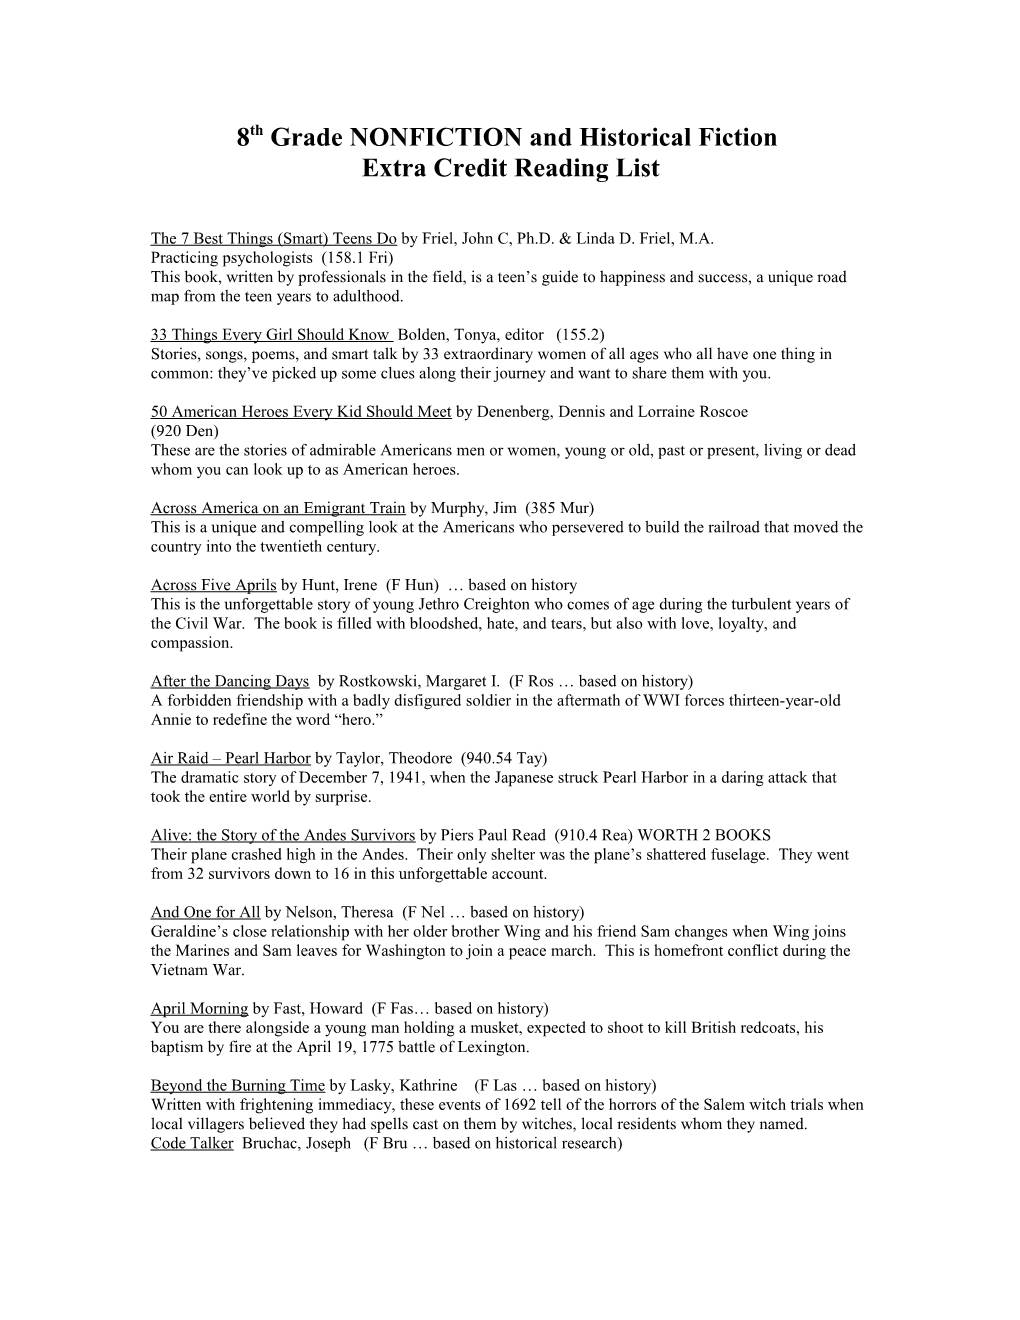 8Th Grade NONFICTION Extra Credit Reading List